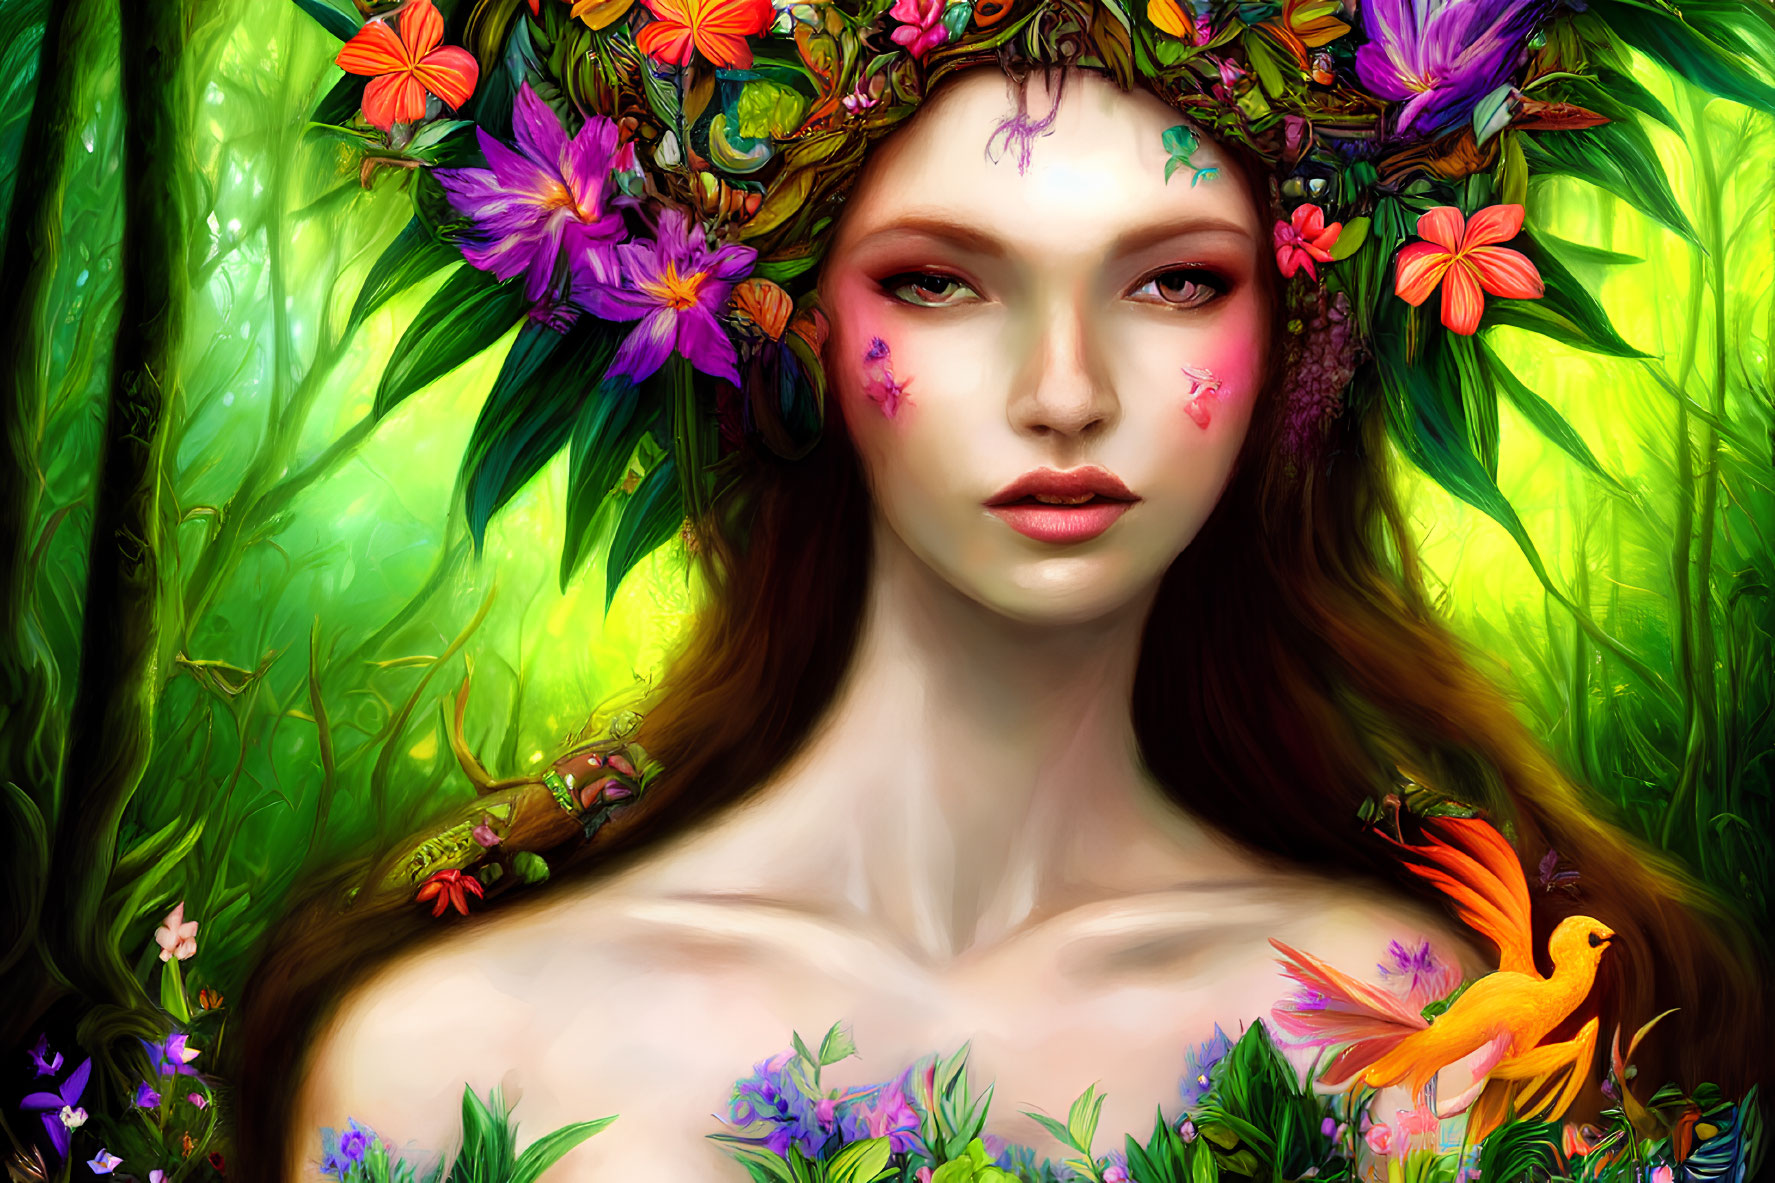 Digital artwork of woman with floral crown and bird in lush greenery